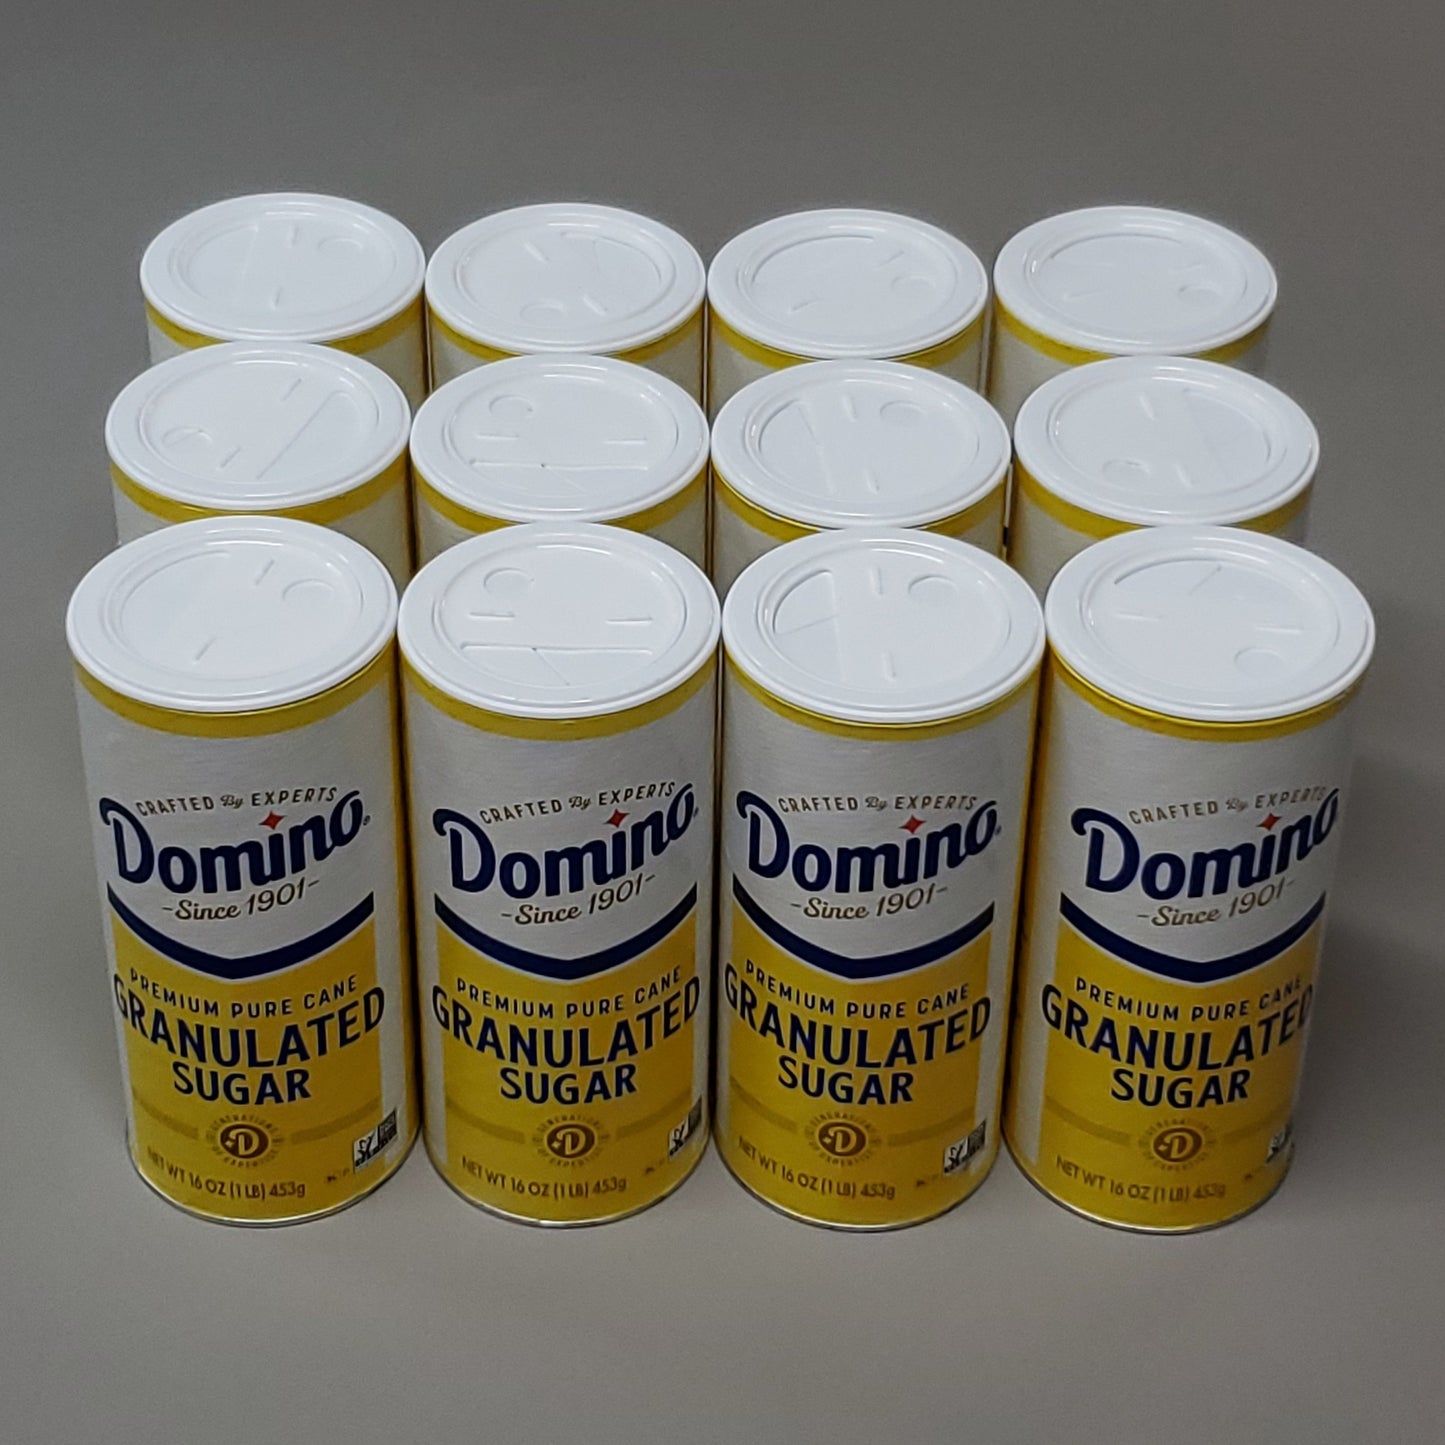 DOMINO Premium Pure Cane Granulated Sugar 12-PACK 16 oz (1 lb) Best By 12/24 (New)